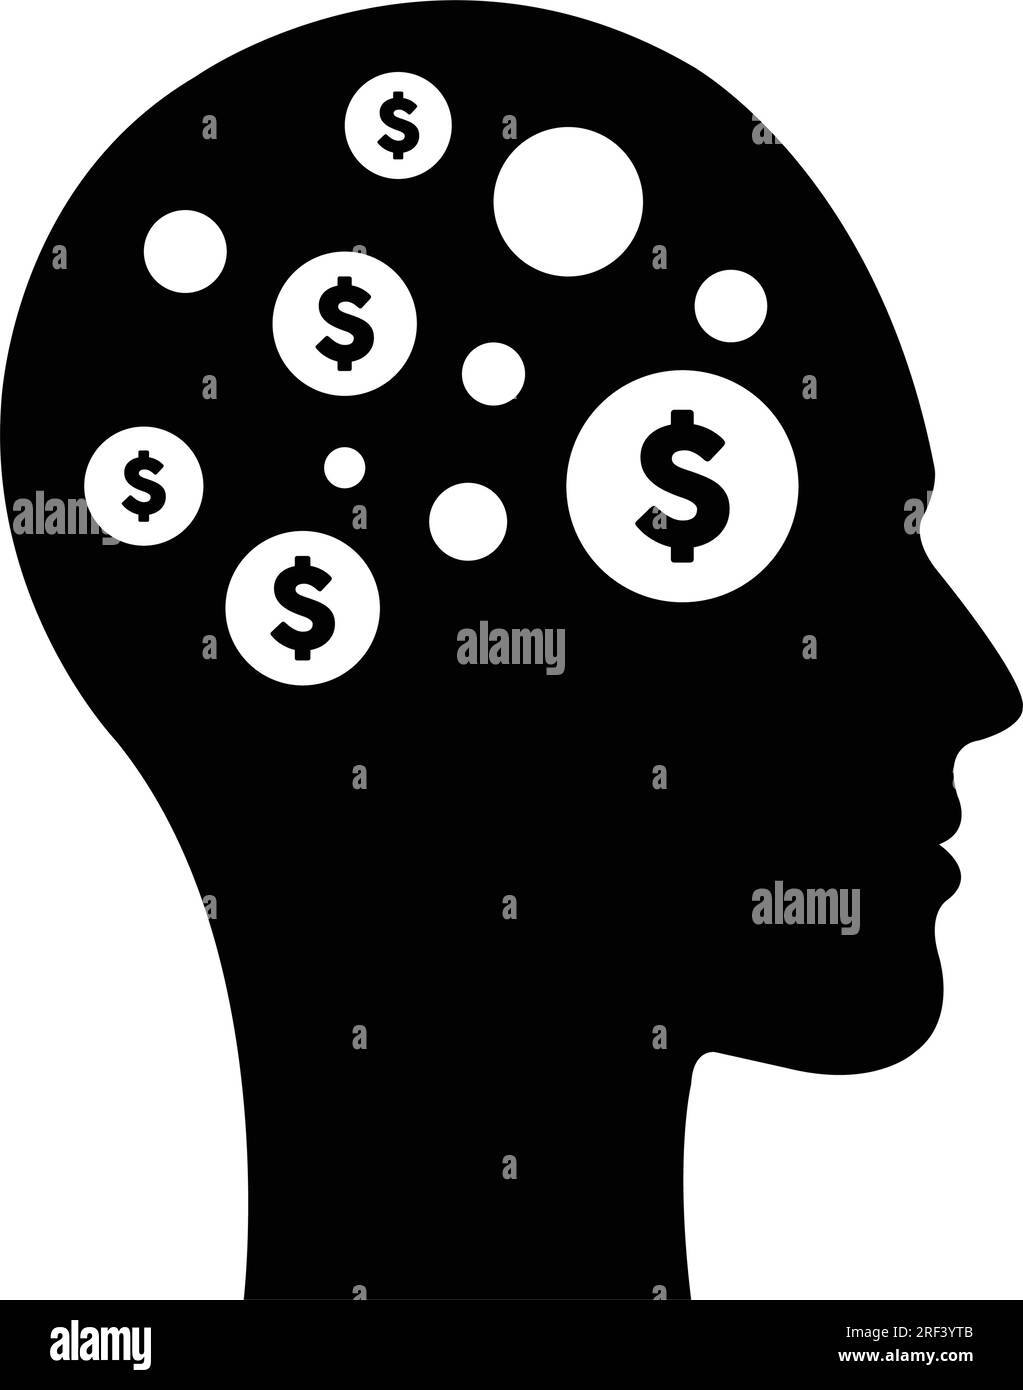 Digital dollar sign icon on futuristic human profile face with brain chip implant for AI Artifical Intelligence finance and money mind illustration in Stock Vector